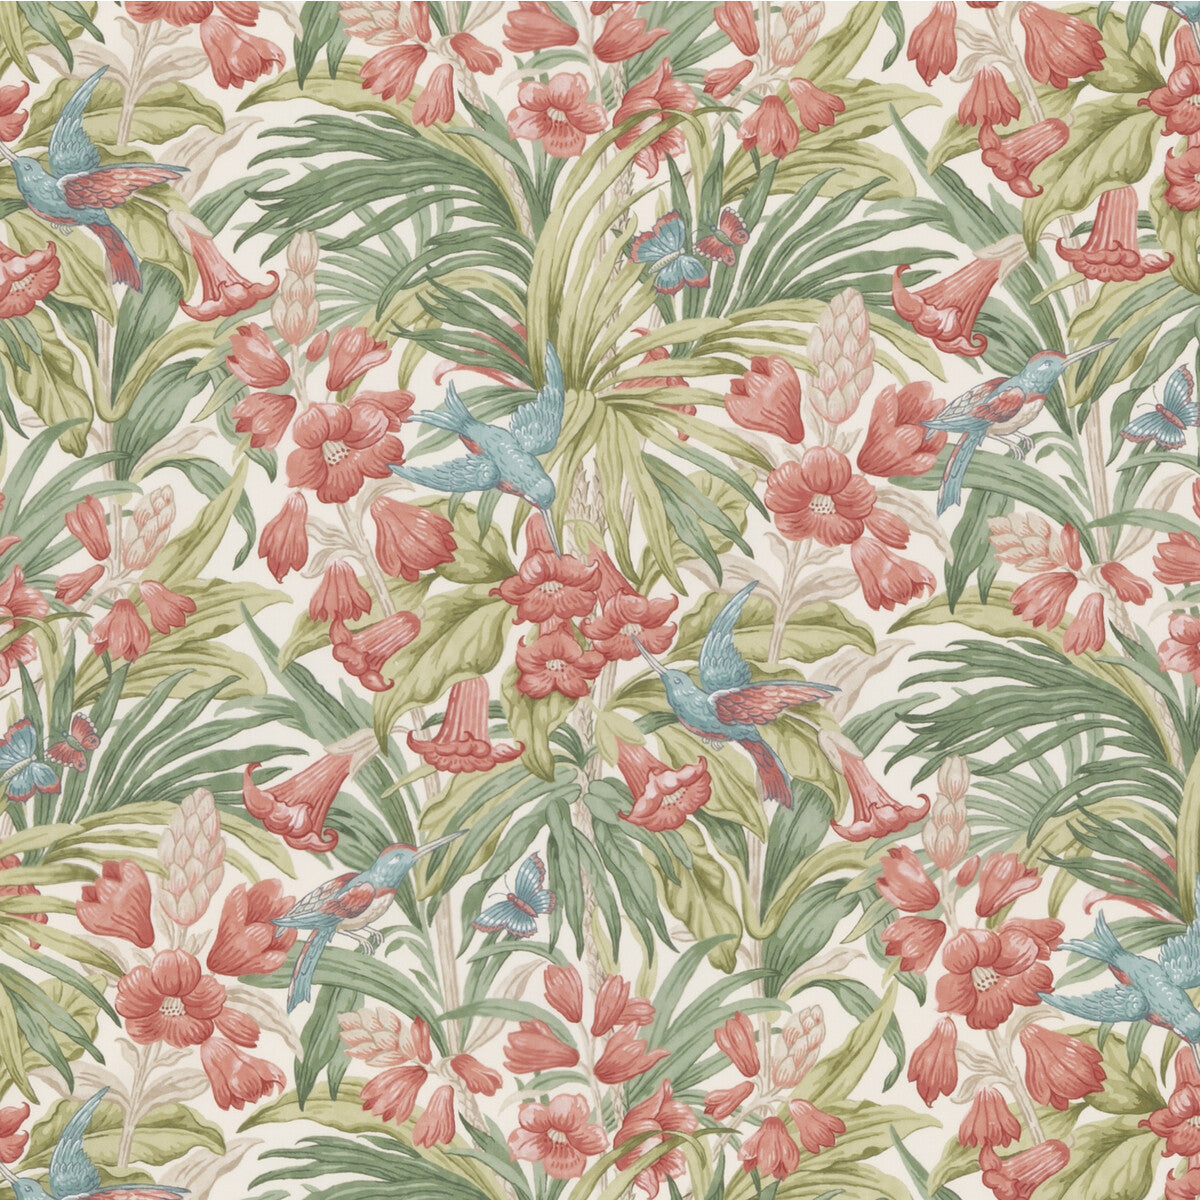 Trumpet Flowers Cotton fabric in red/green color - pattern BP10976.1.0 - by G P &amp; J Baker in the Original Brantwood Fabric collection